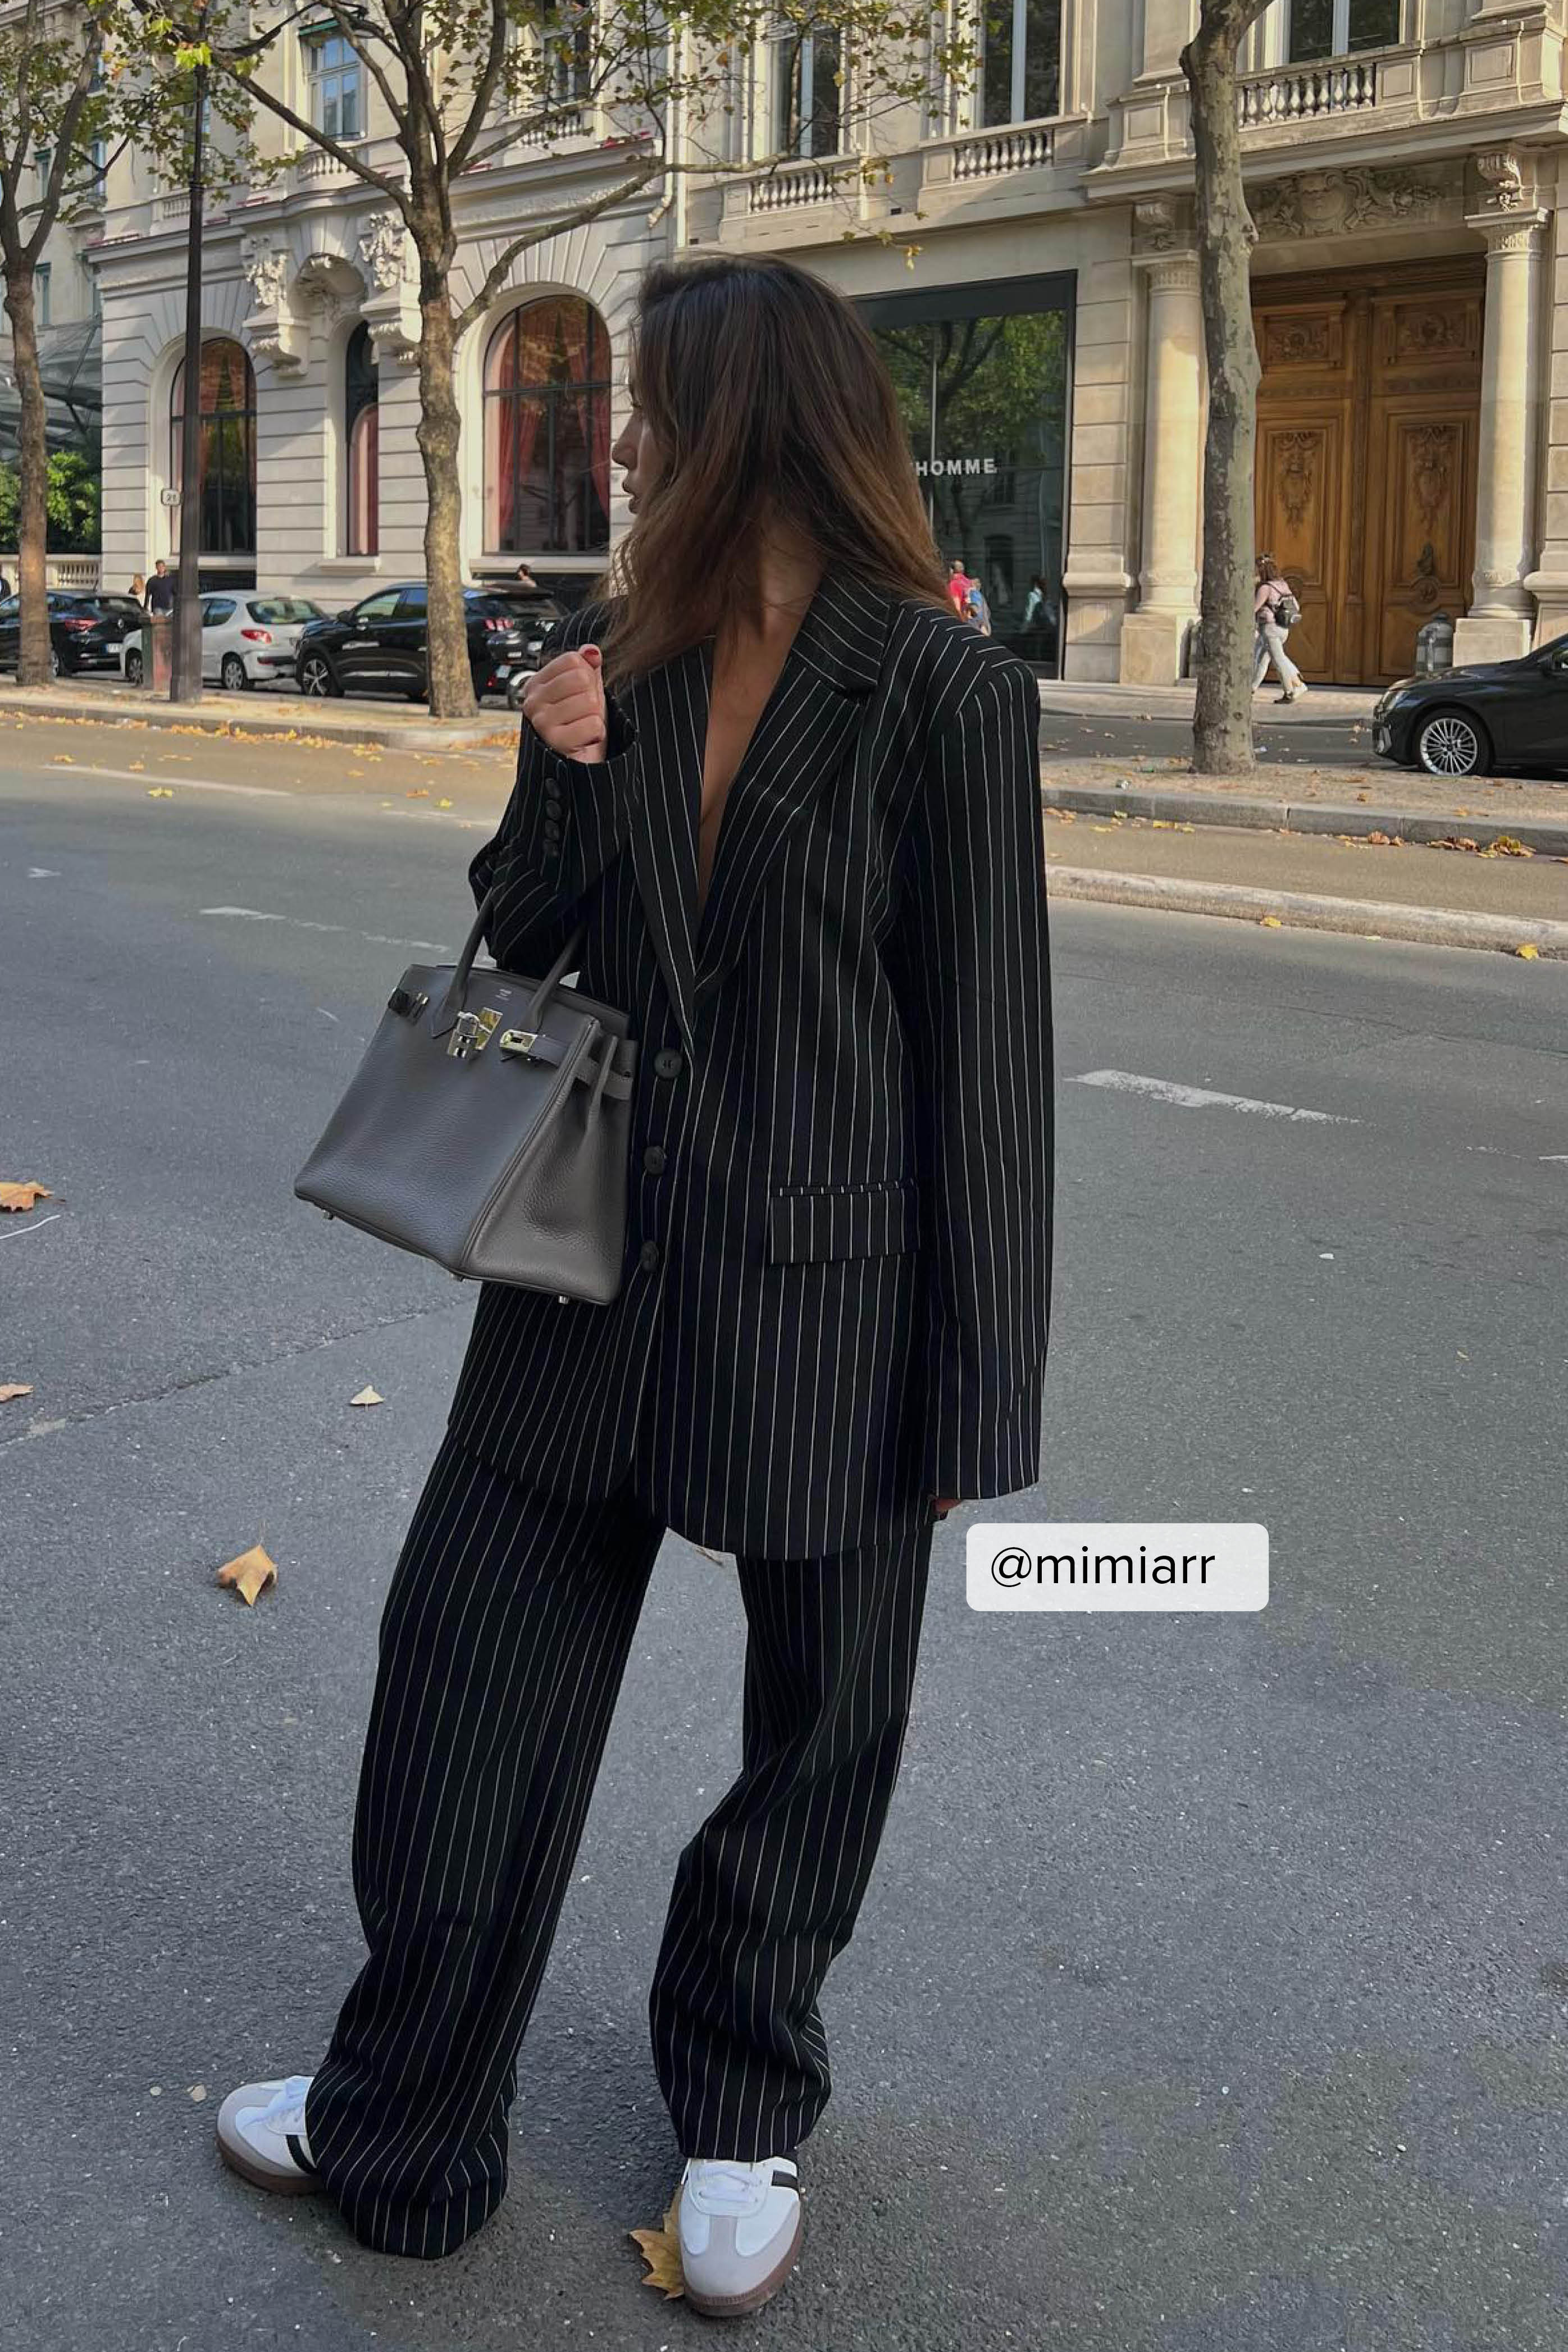 Women's White Dress Shirt, Navy and White Vertical Striped Pajama Pants,  Black Leather Heeled Sandals, Mustard Leather Crossbody Bag | Milan fashion  week street style, Fashion week street style, Summer work outfits